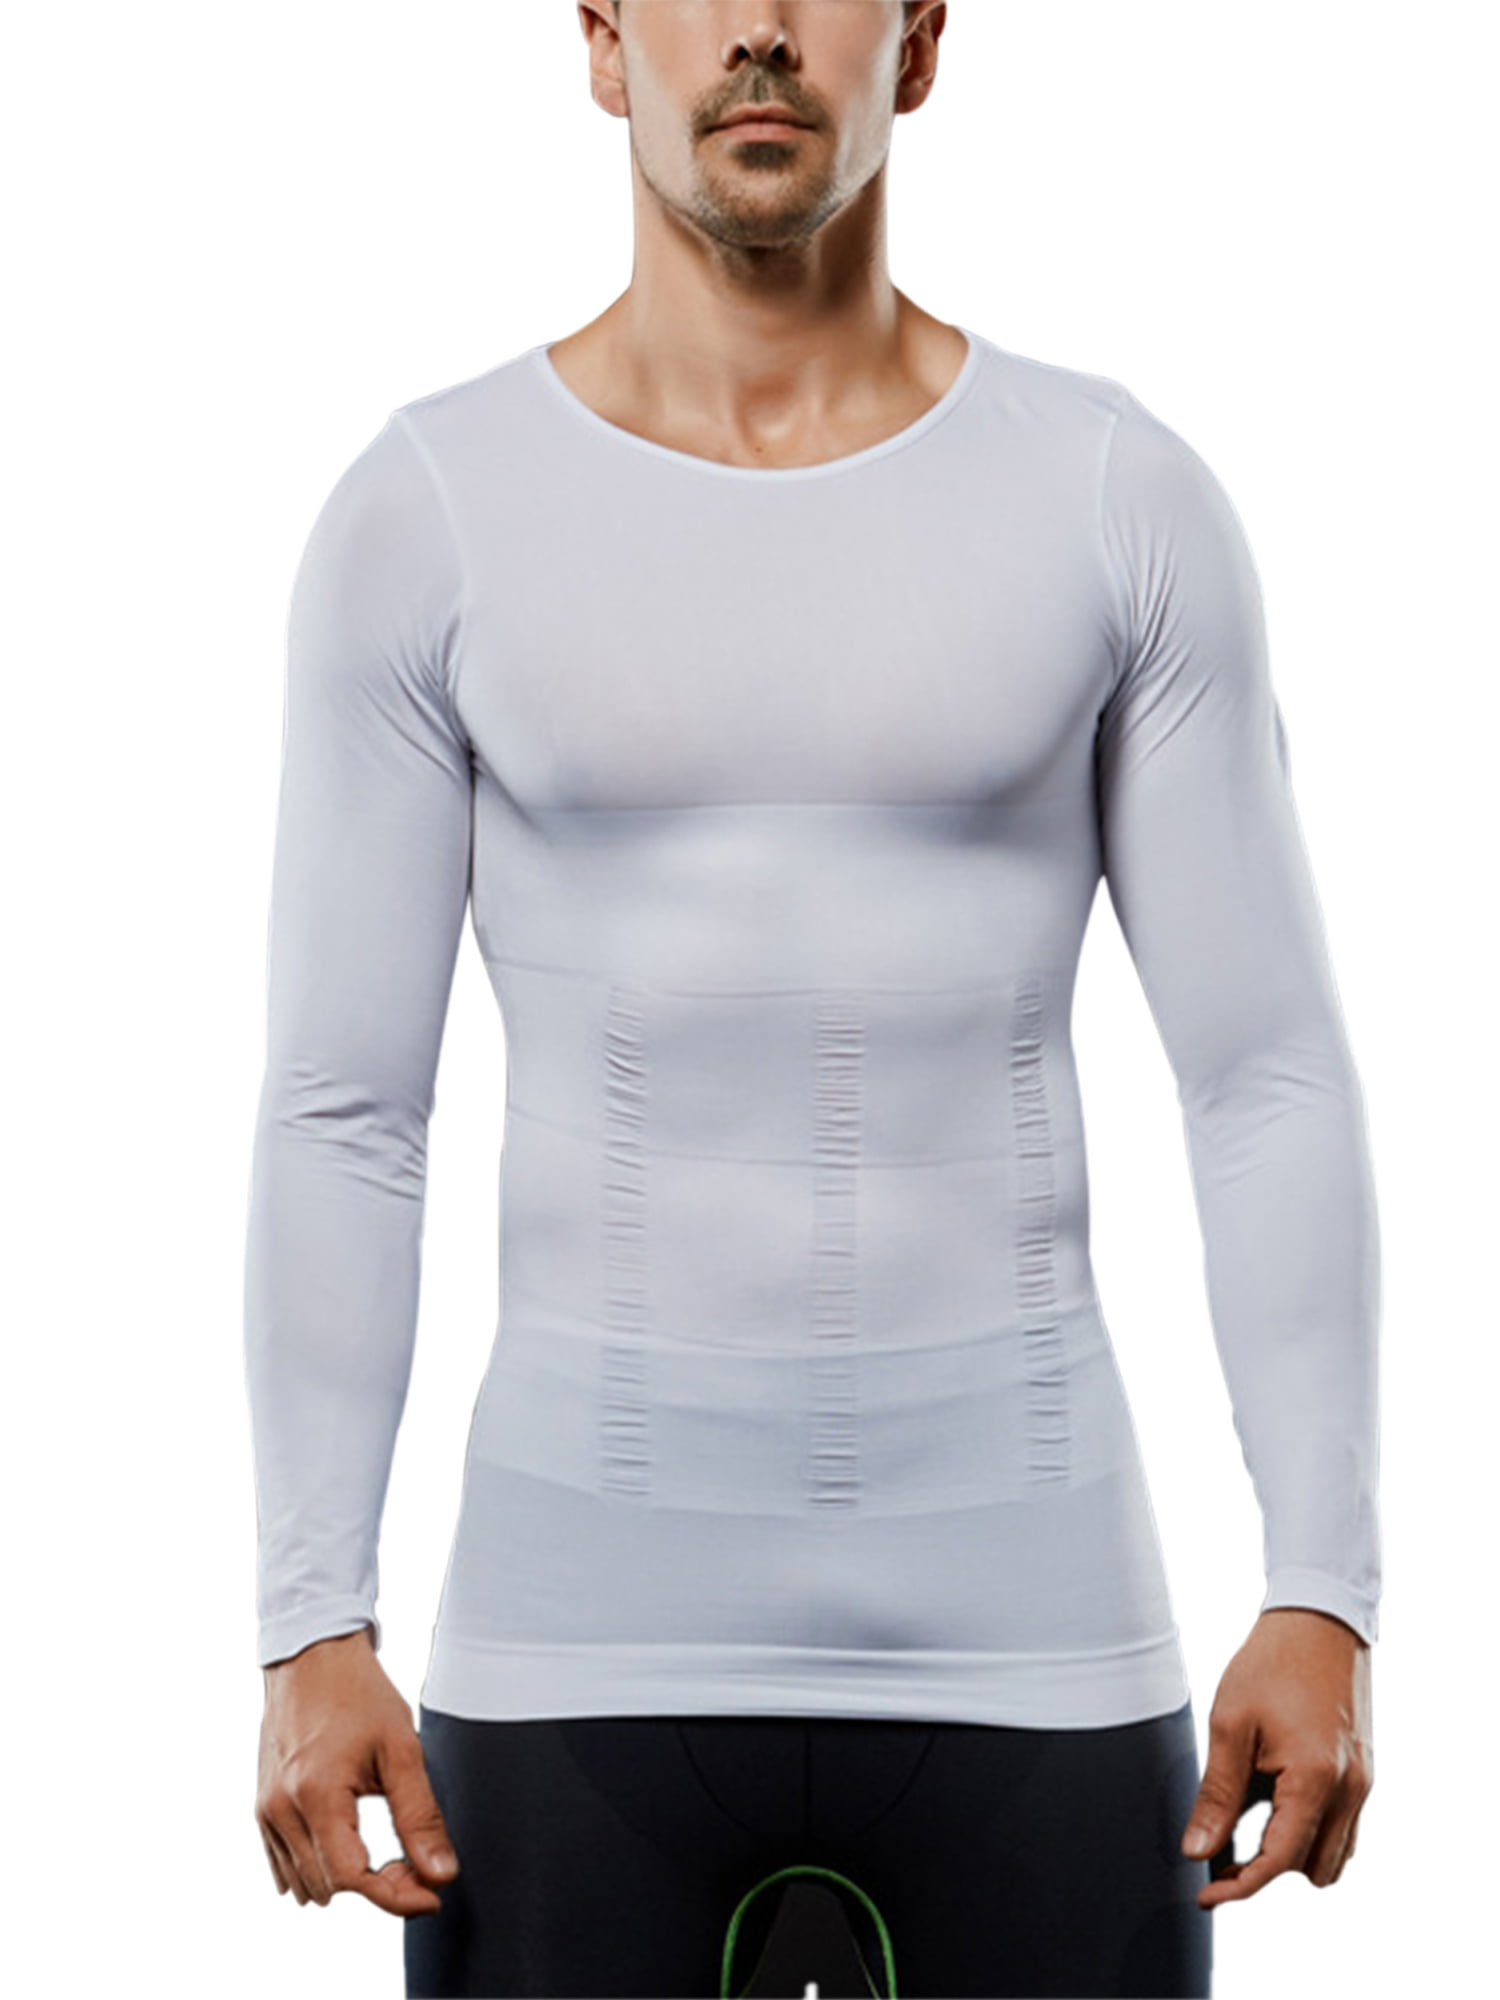 Men Shirt Long Sleeve Sports Tight Slimming Body Athletic Muscle Solid Color Tee Top